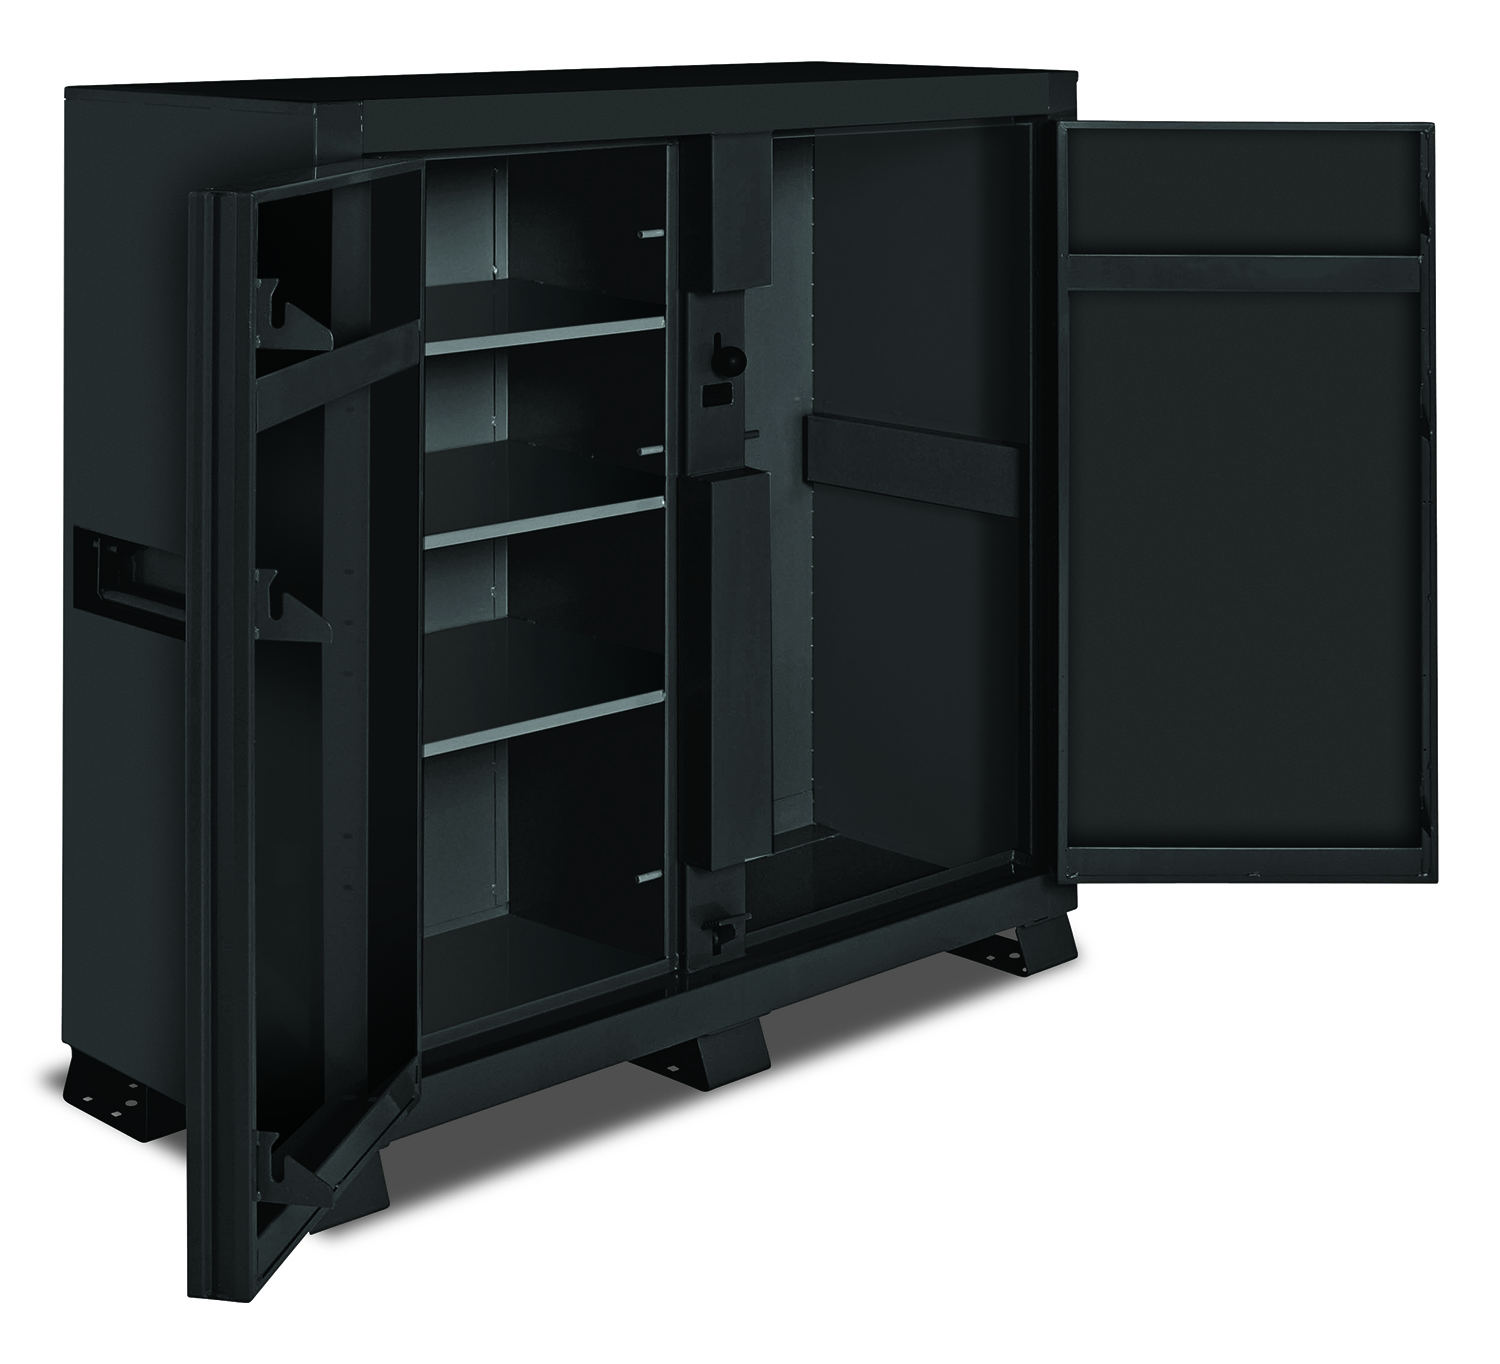 Southwire's two door cabinet gives you added piece of mind knowing your equipment and materials are safe and secure. With heavy duty shelves and a large vertical storage area, you can easily organize while securing your tools and equipment. With the Southwire Storage Cabinet, there is no better way to control and secure your livelihood. Two Door Cabinet